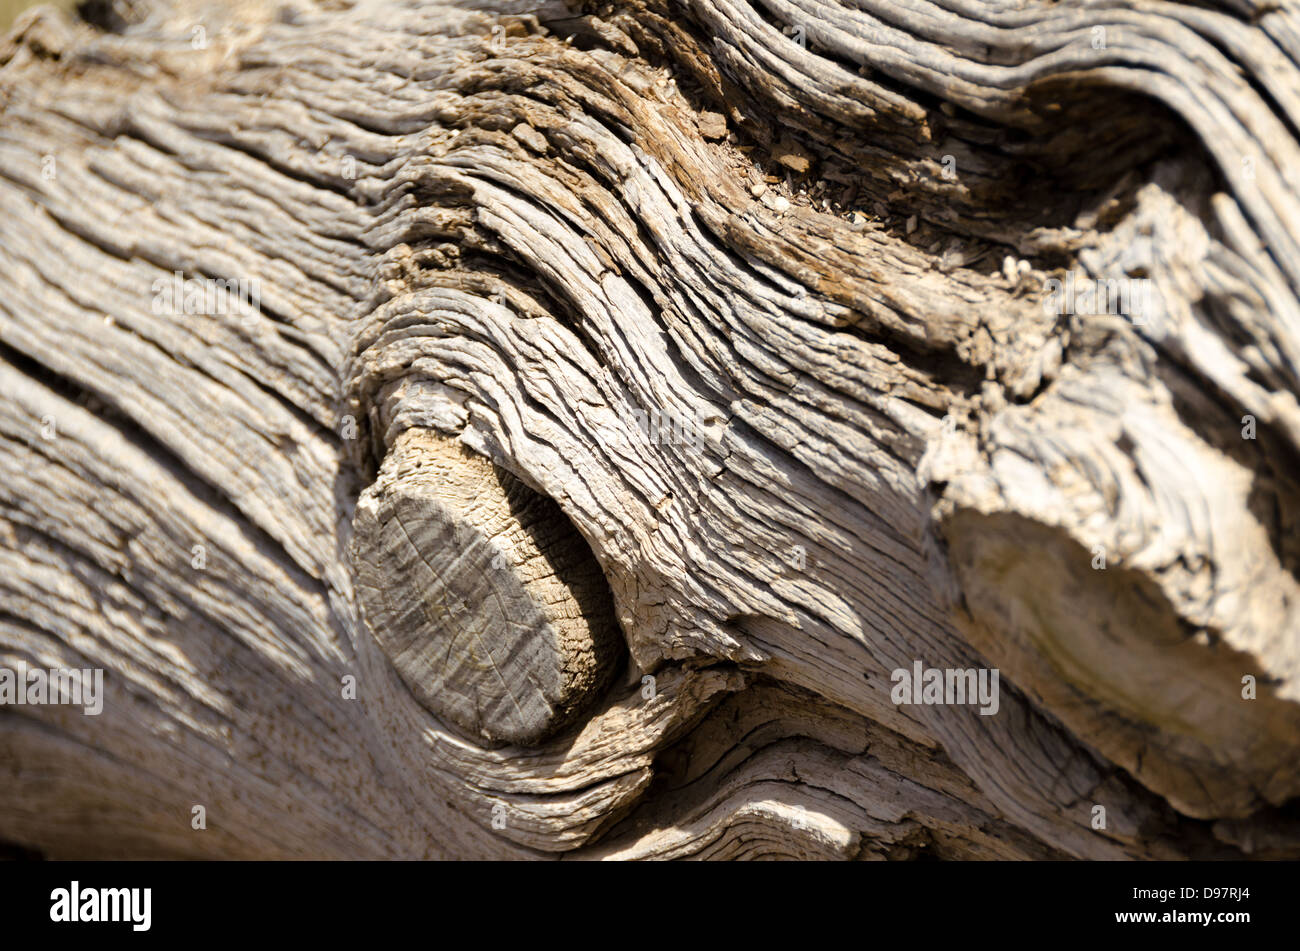 Close up view of a weathered tree showing a knot Stock Photo